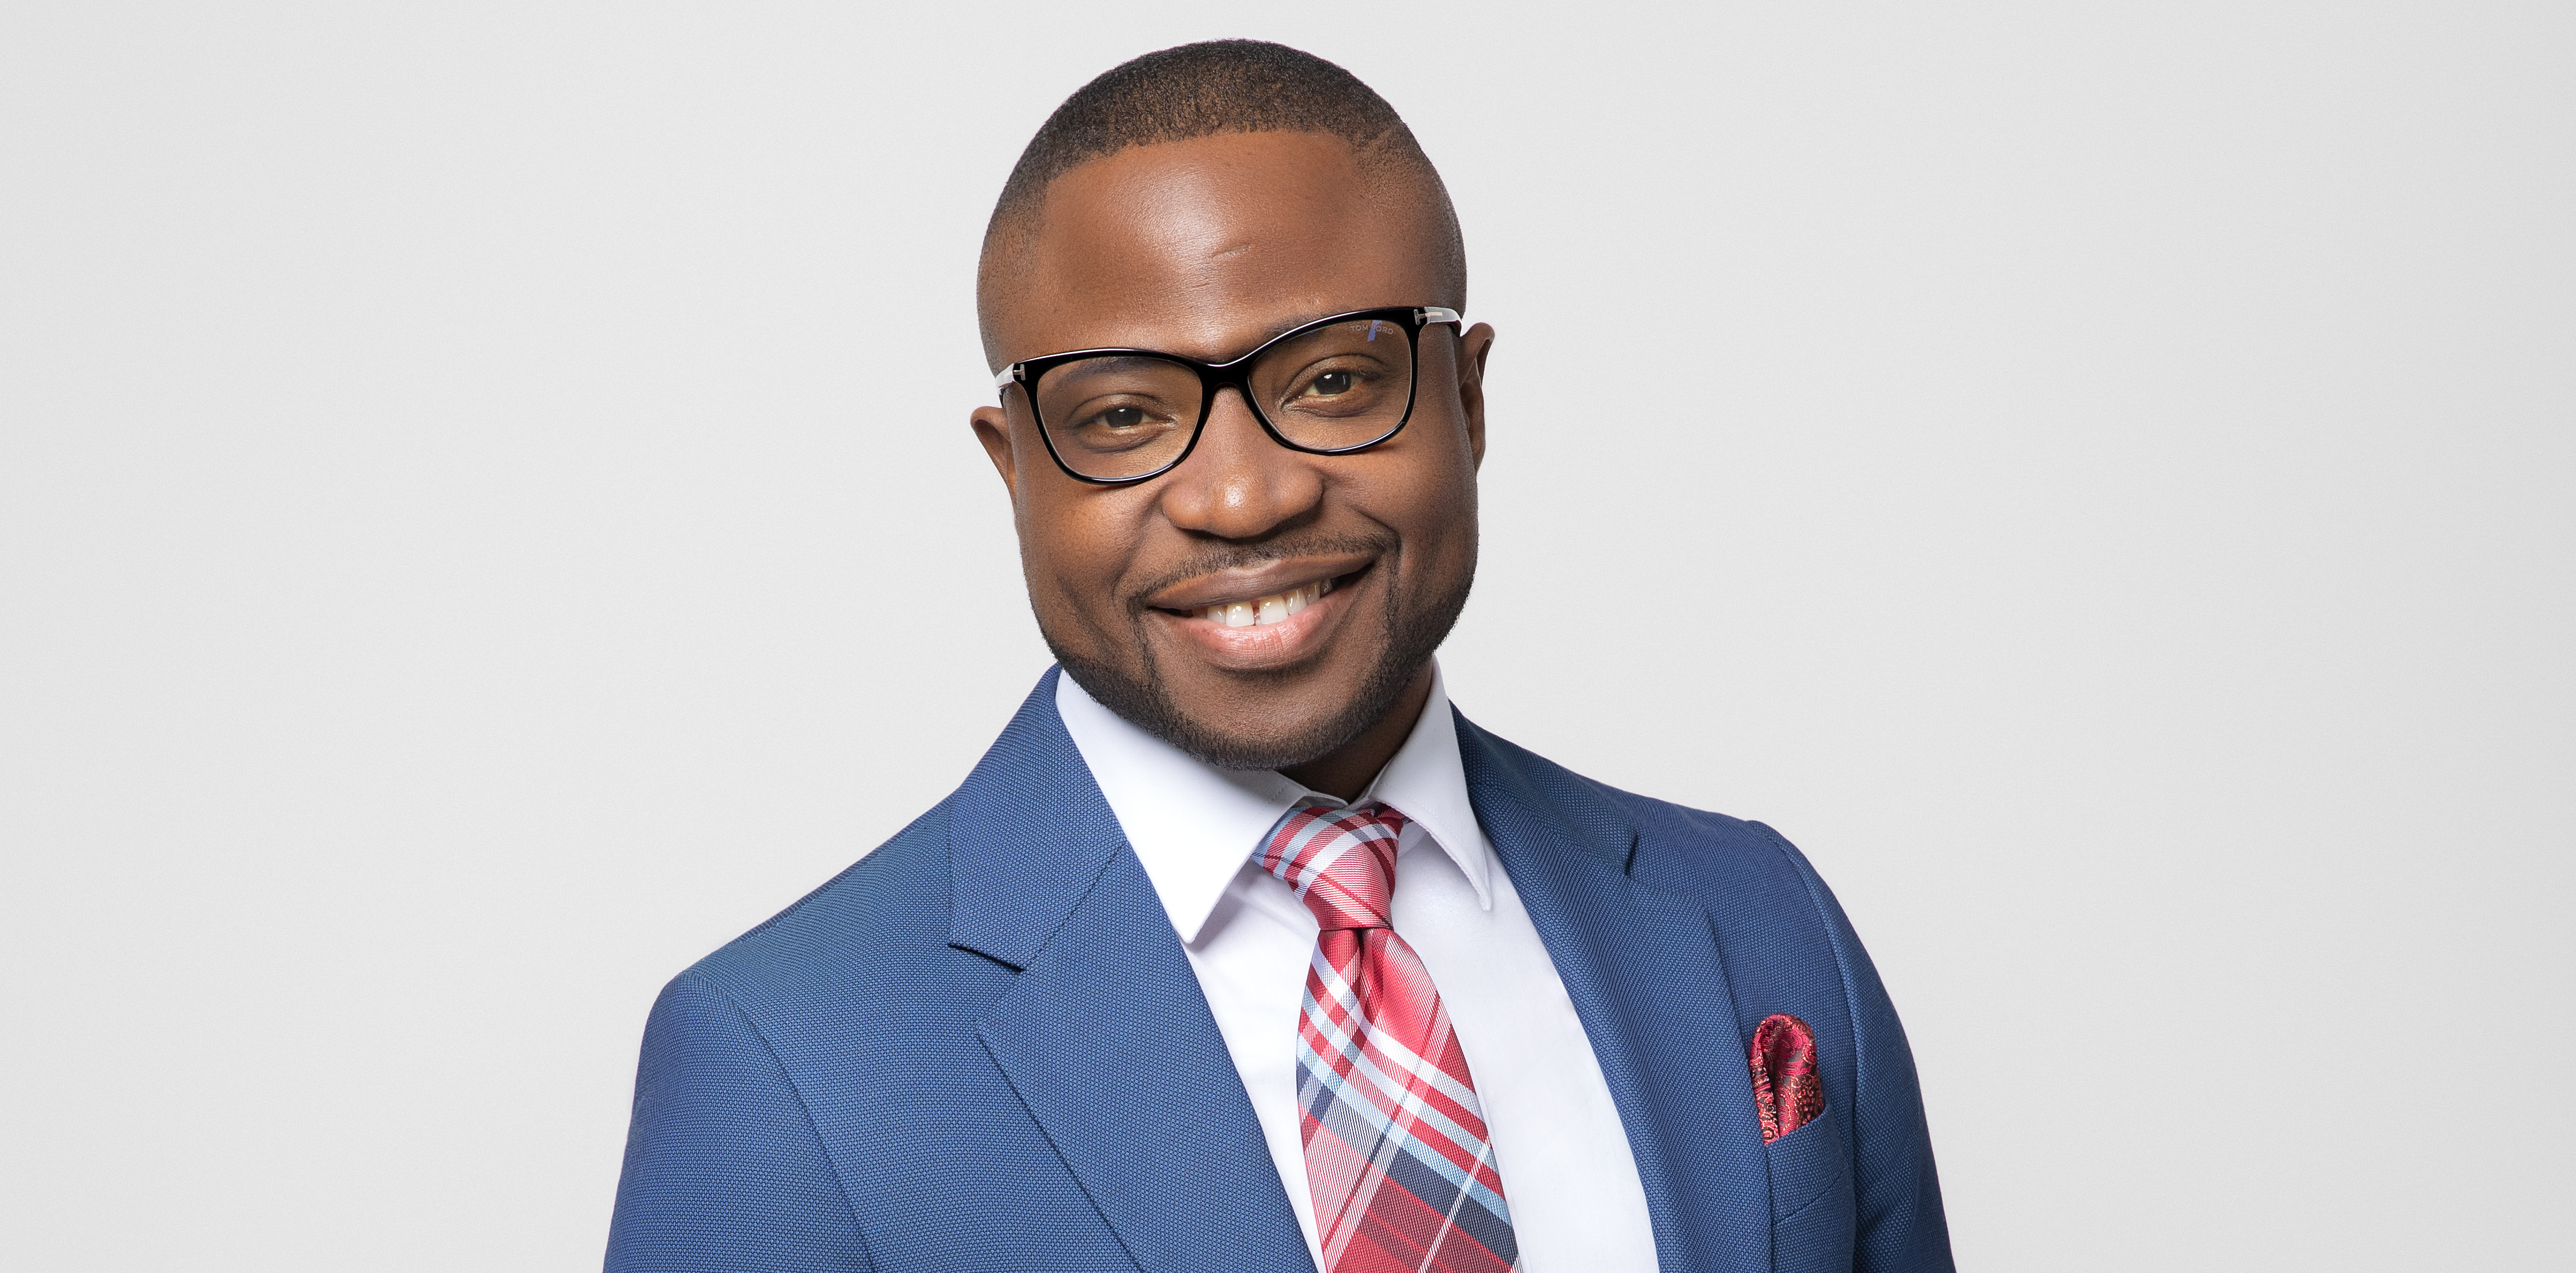 From Nigeria To The US: Adebayo Adebowale Is The #1 Real Estate Leader In The Houston Texas Area